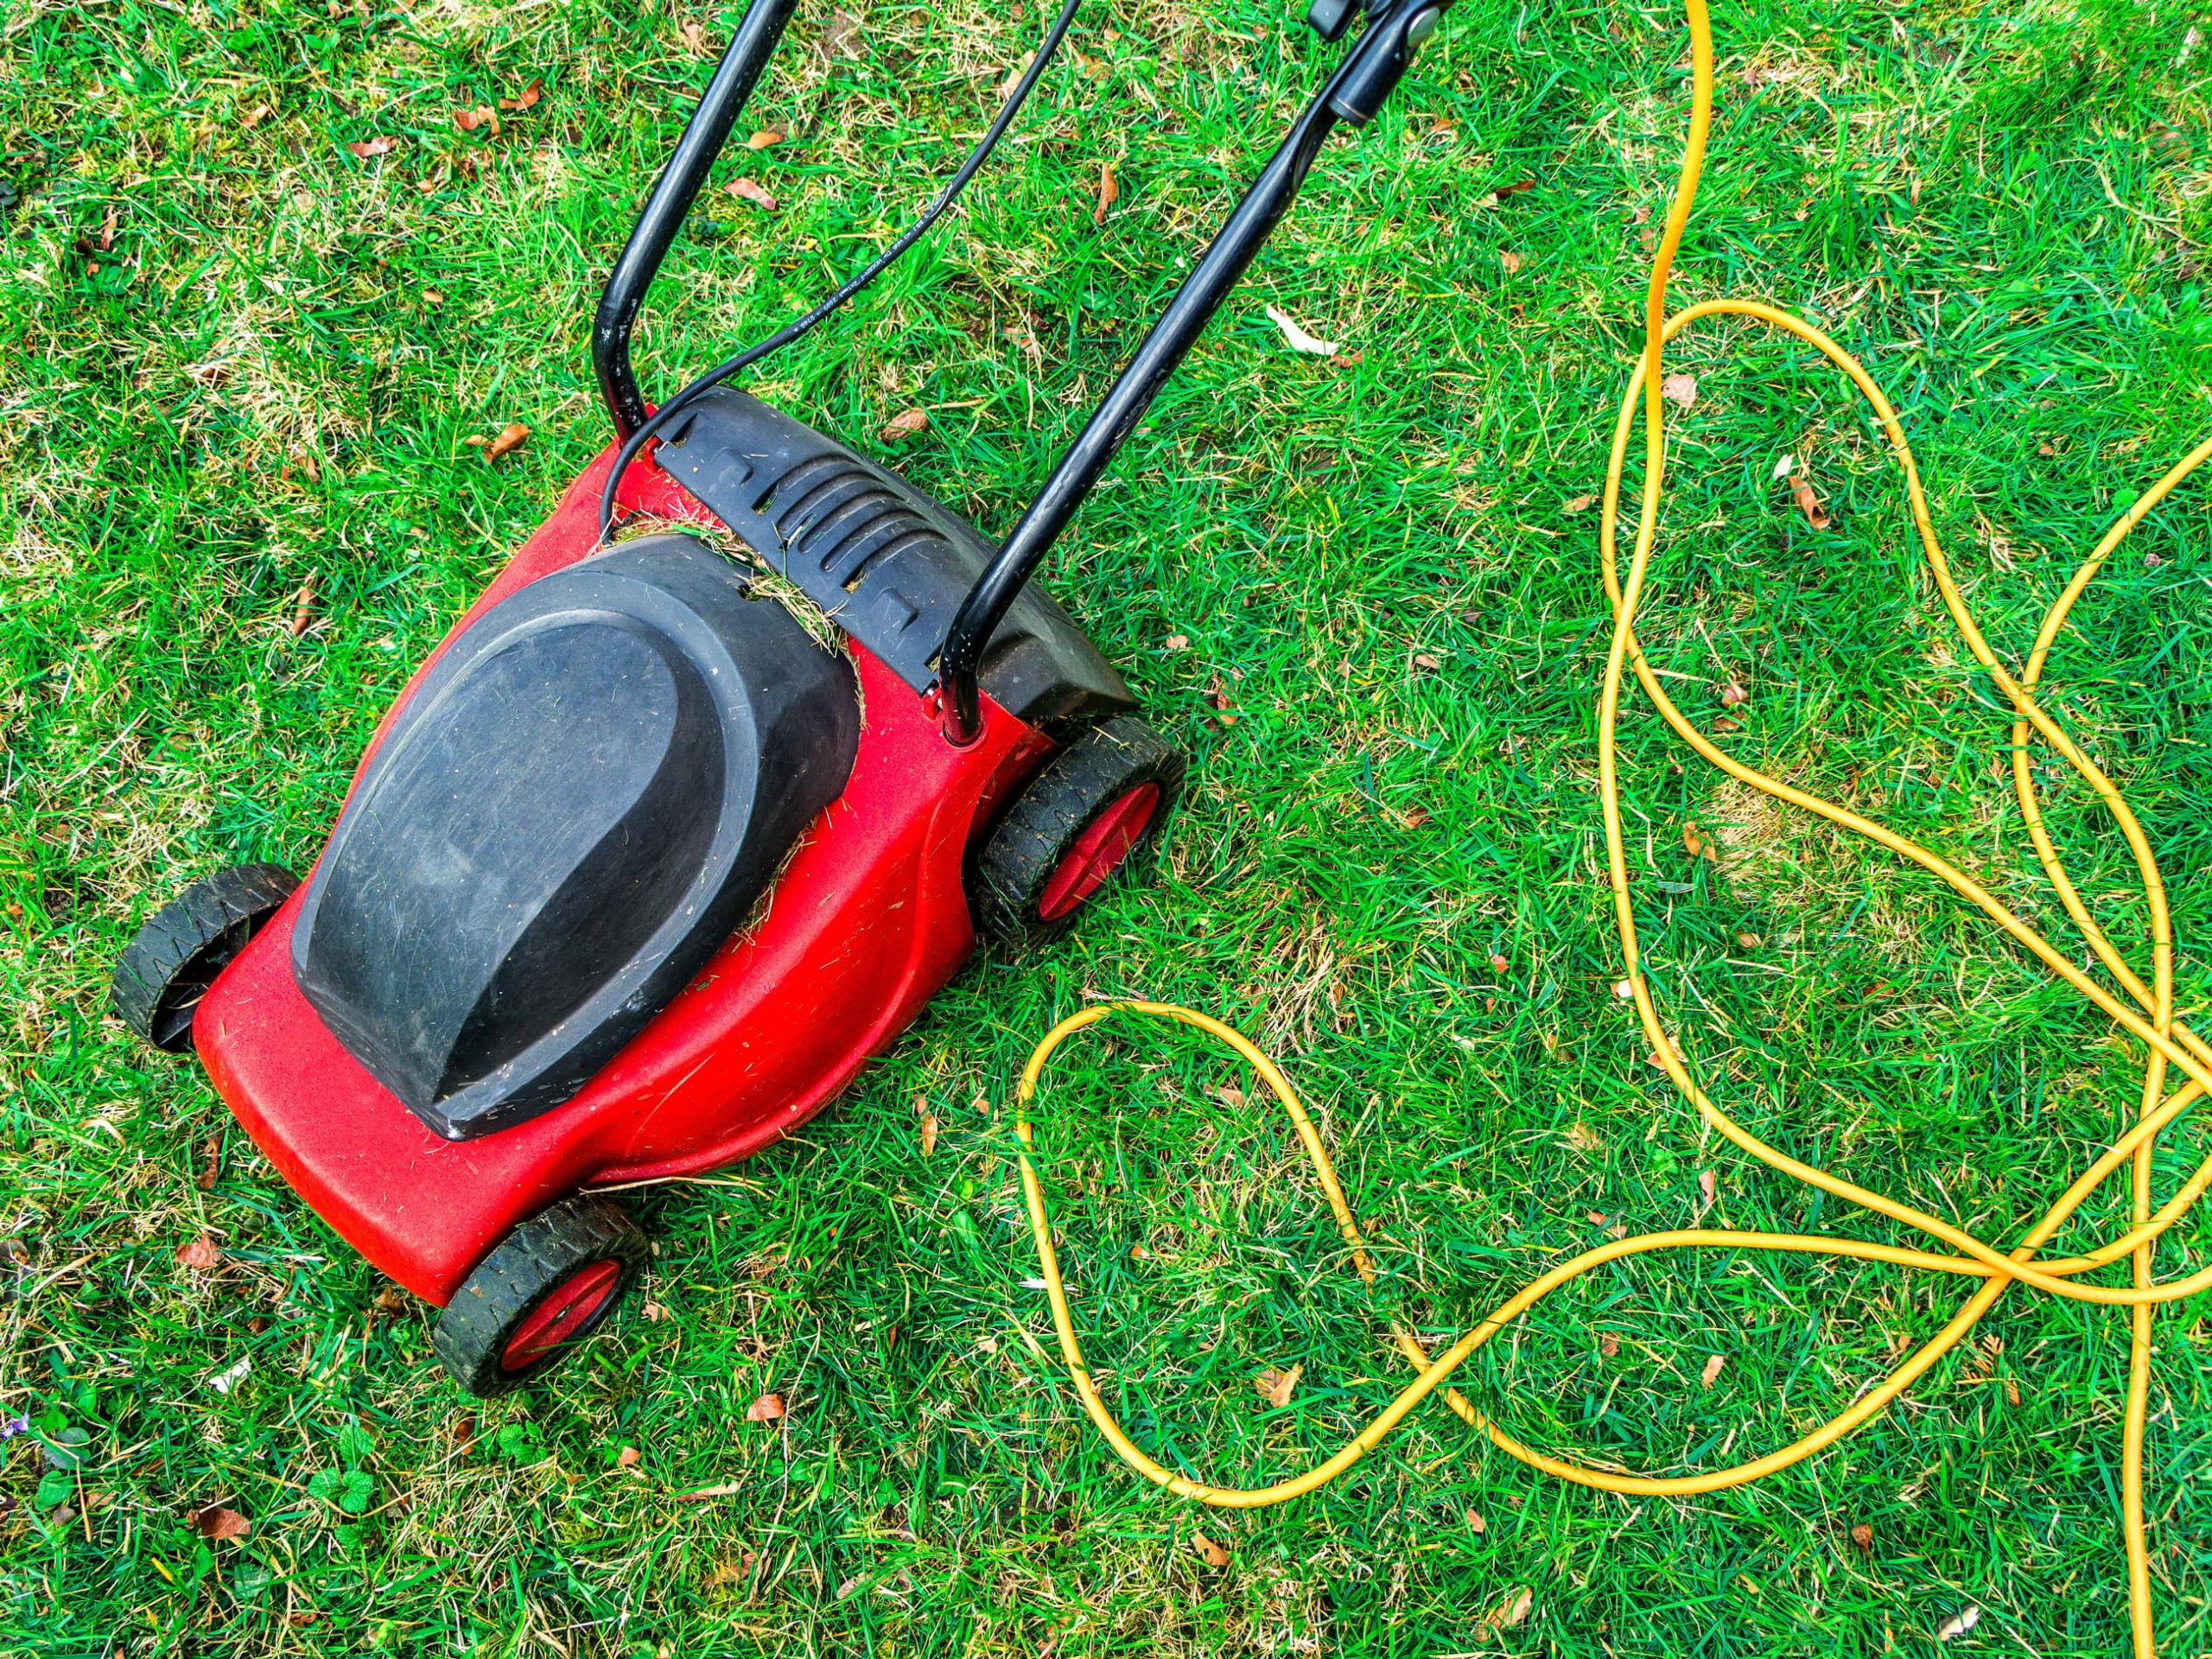 Corded rotary lawn mower on grass.